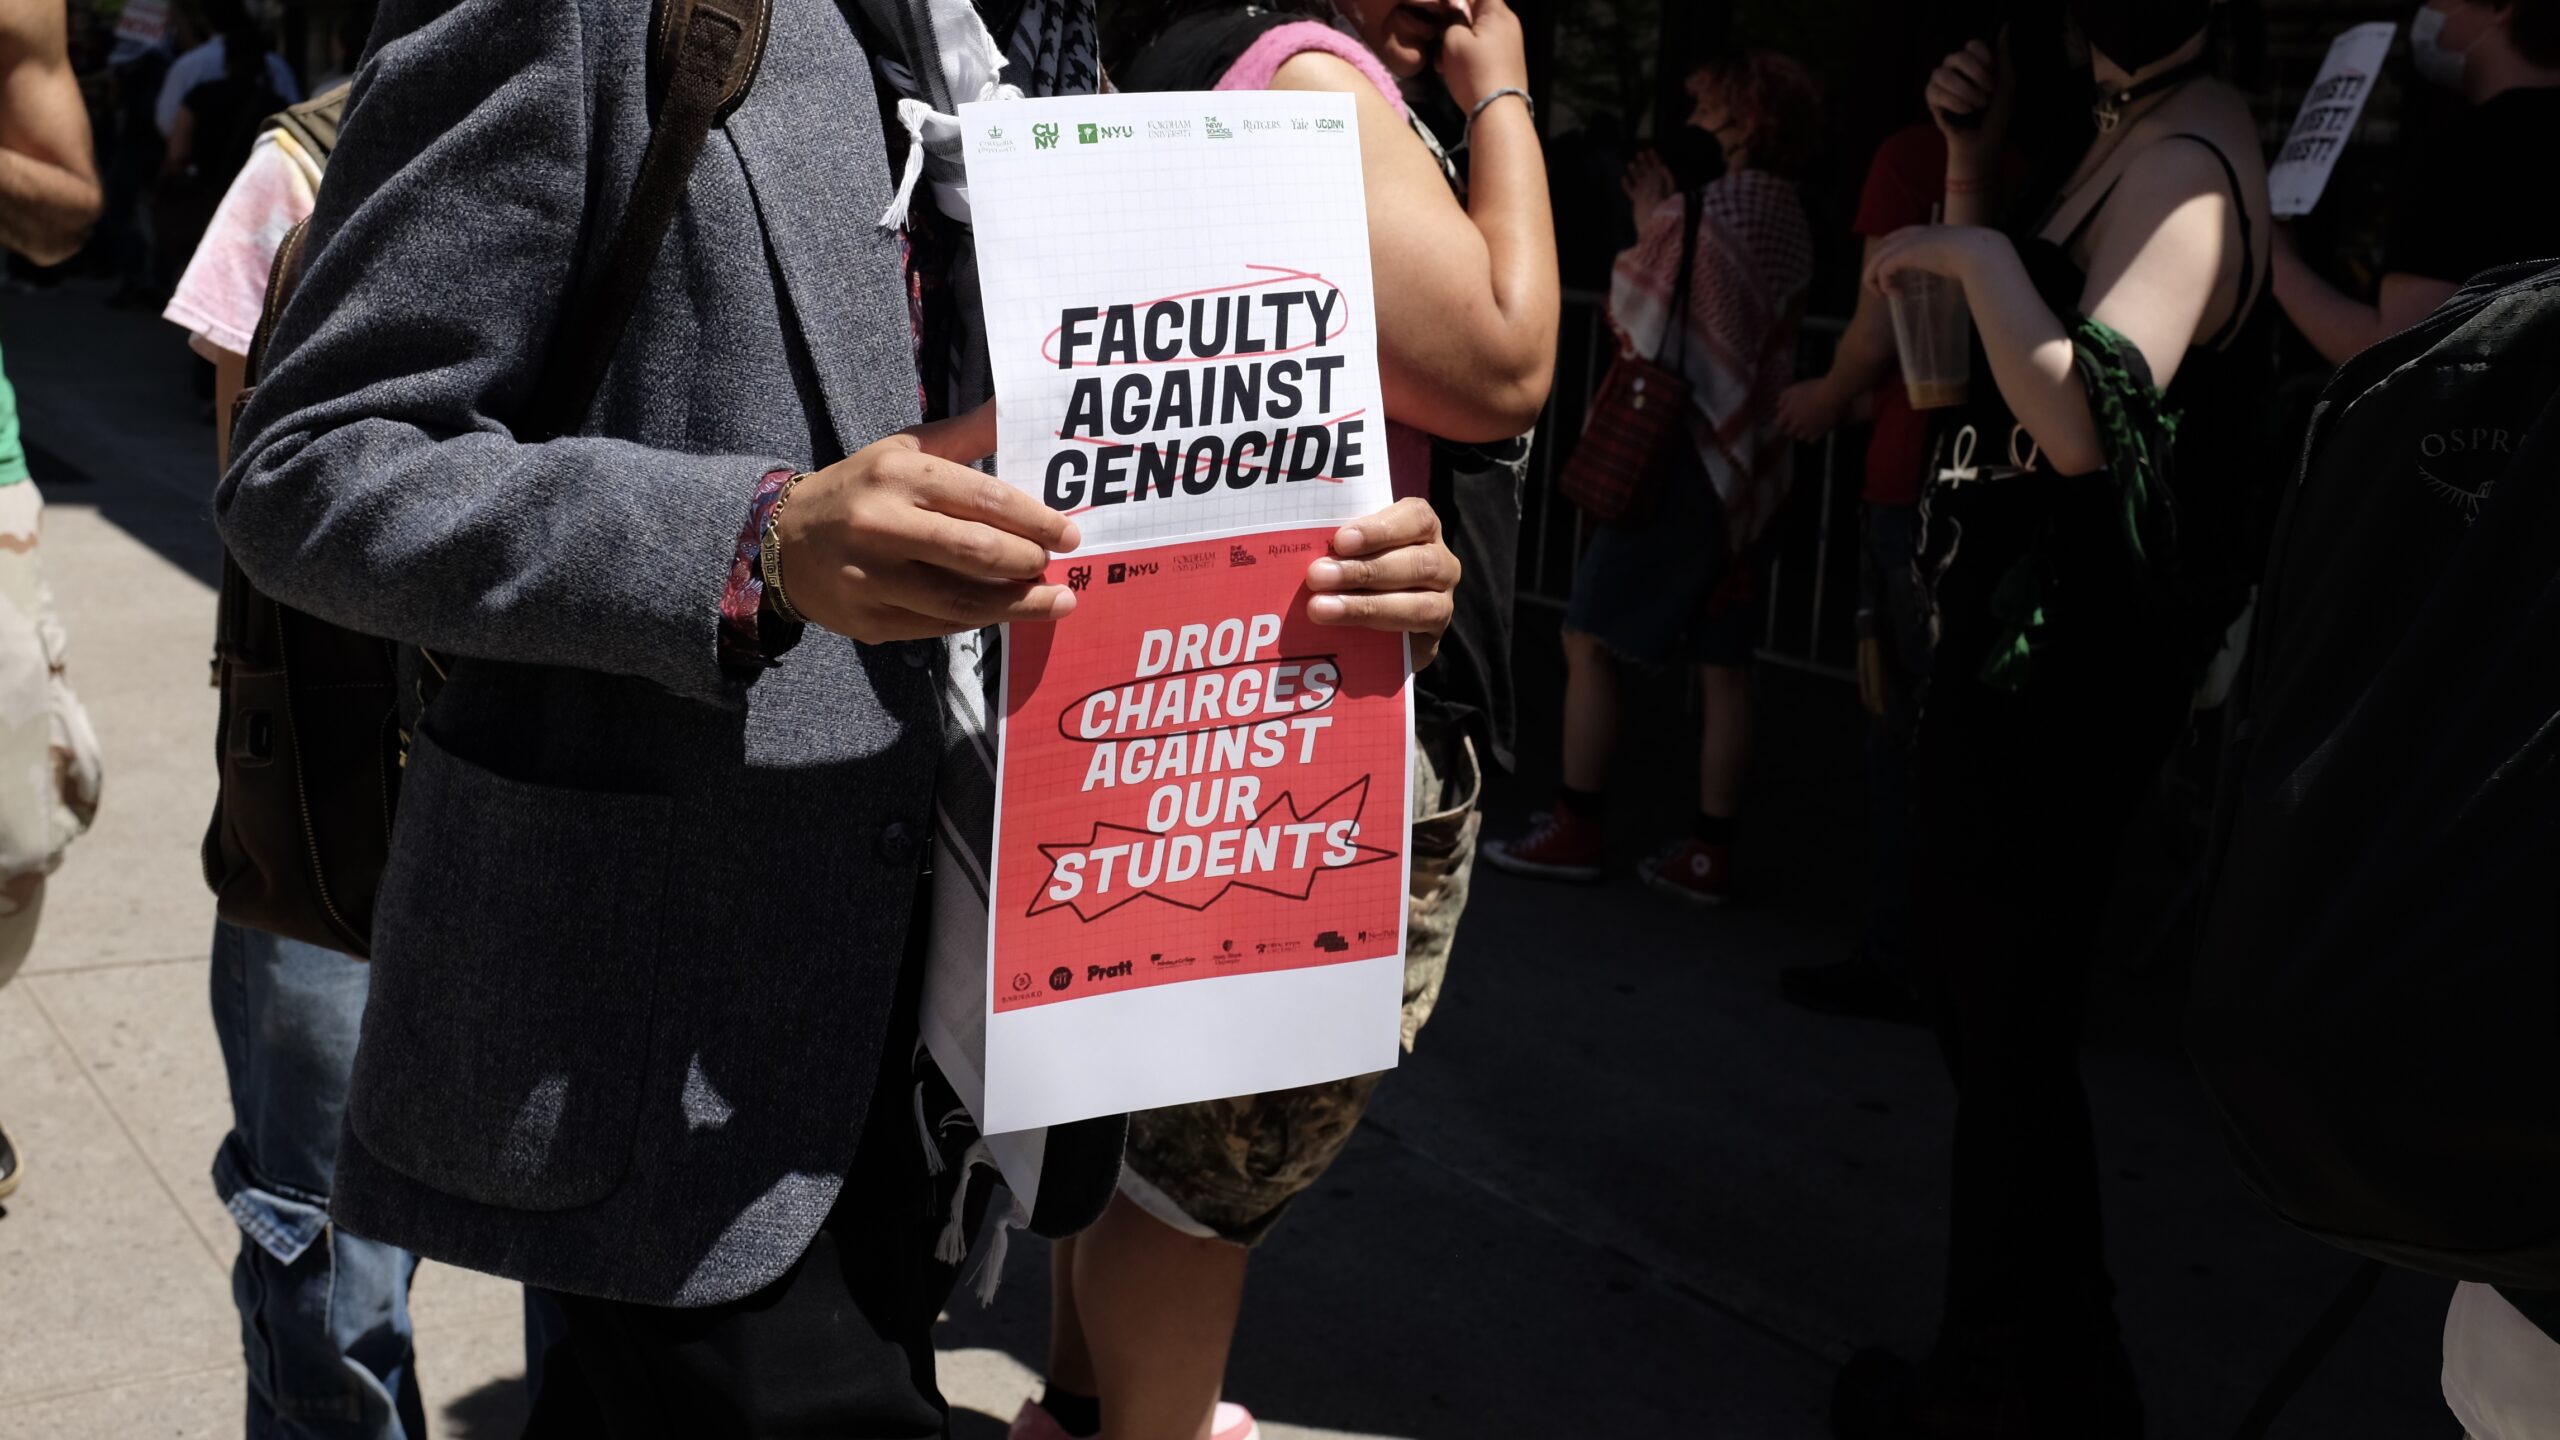 A group of people gather at a rally. One person hold up a sign that reads, “Faculty against genocide” at the top and “drop charges against our students” at the bottom..